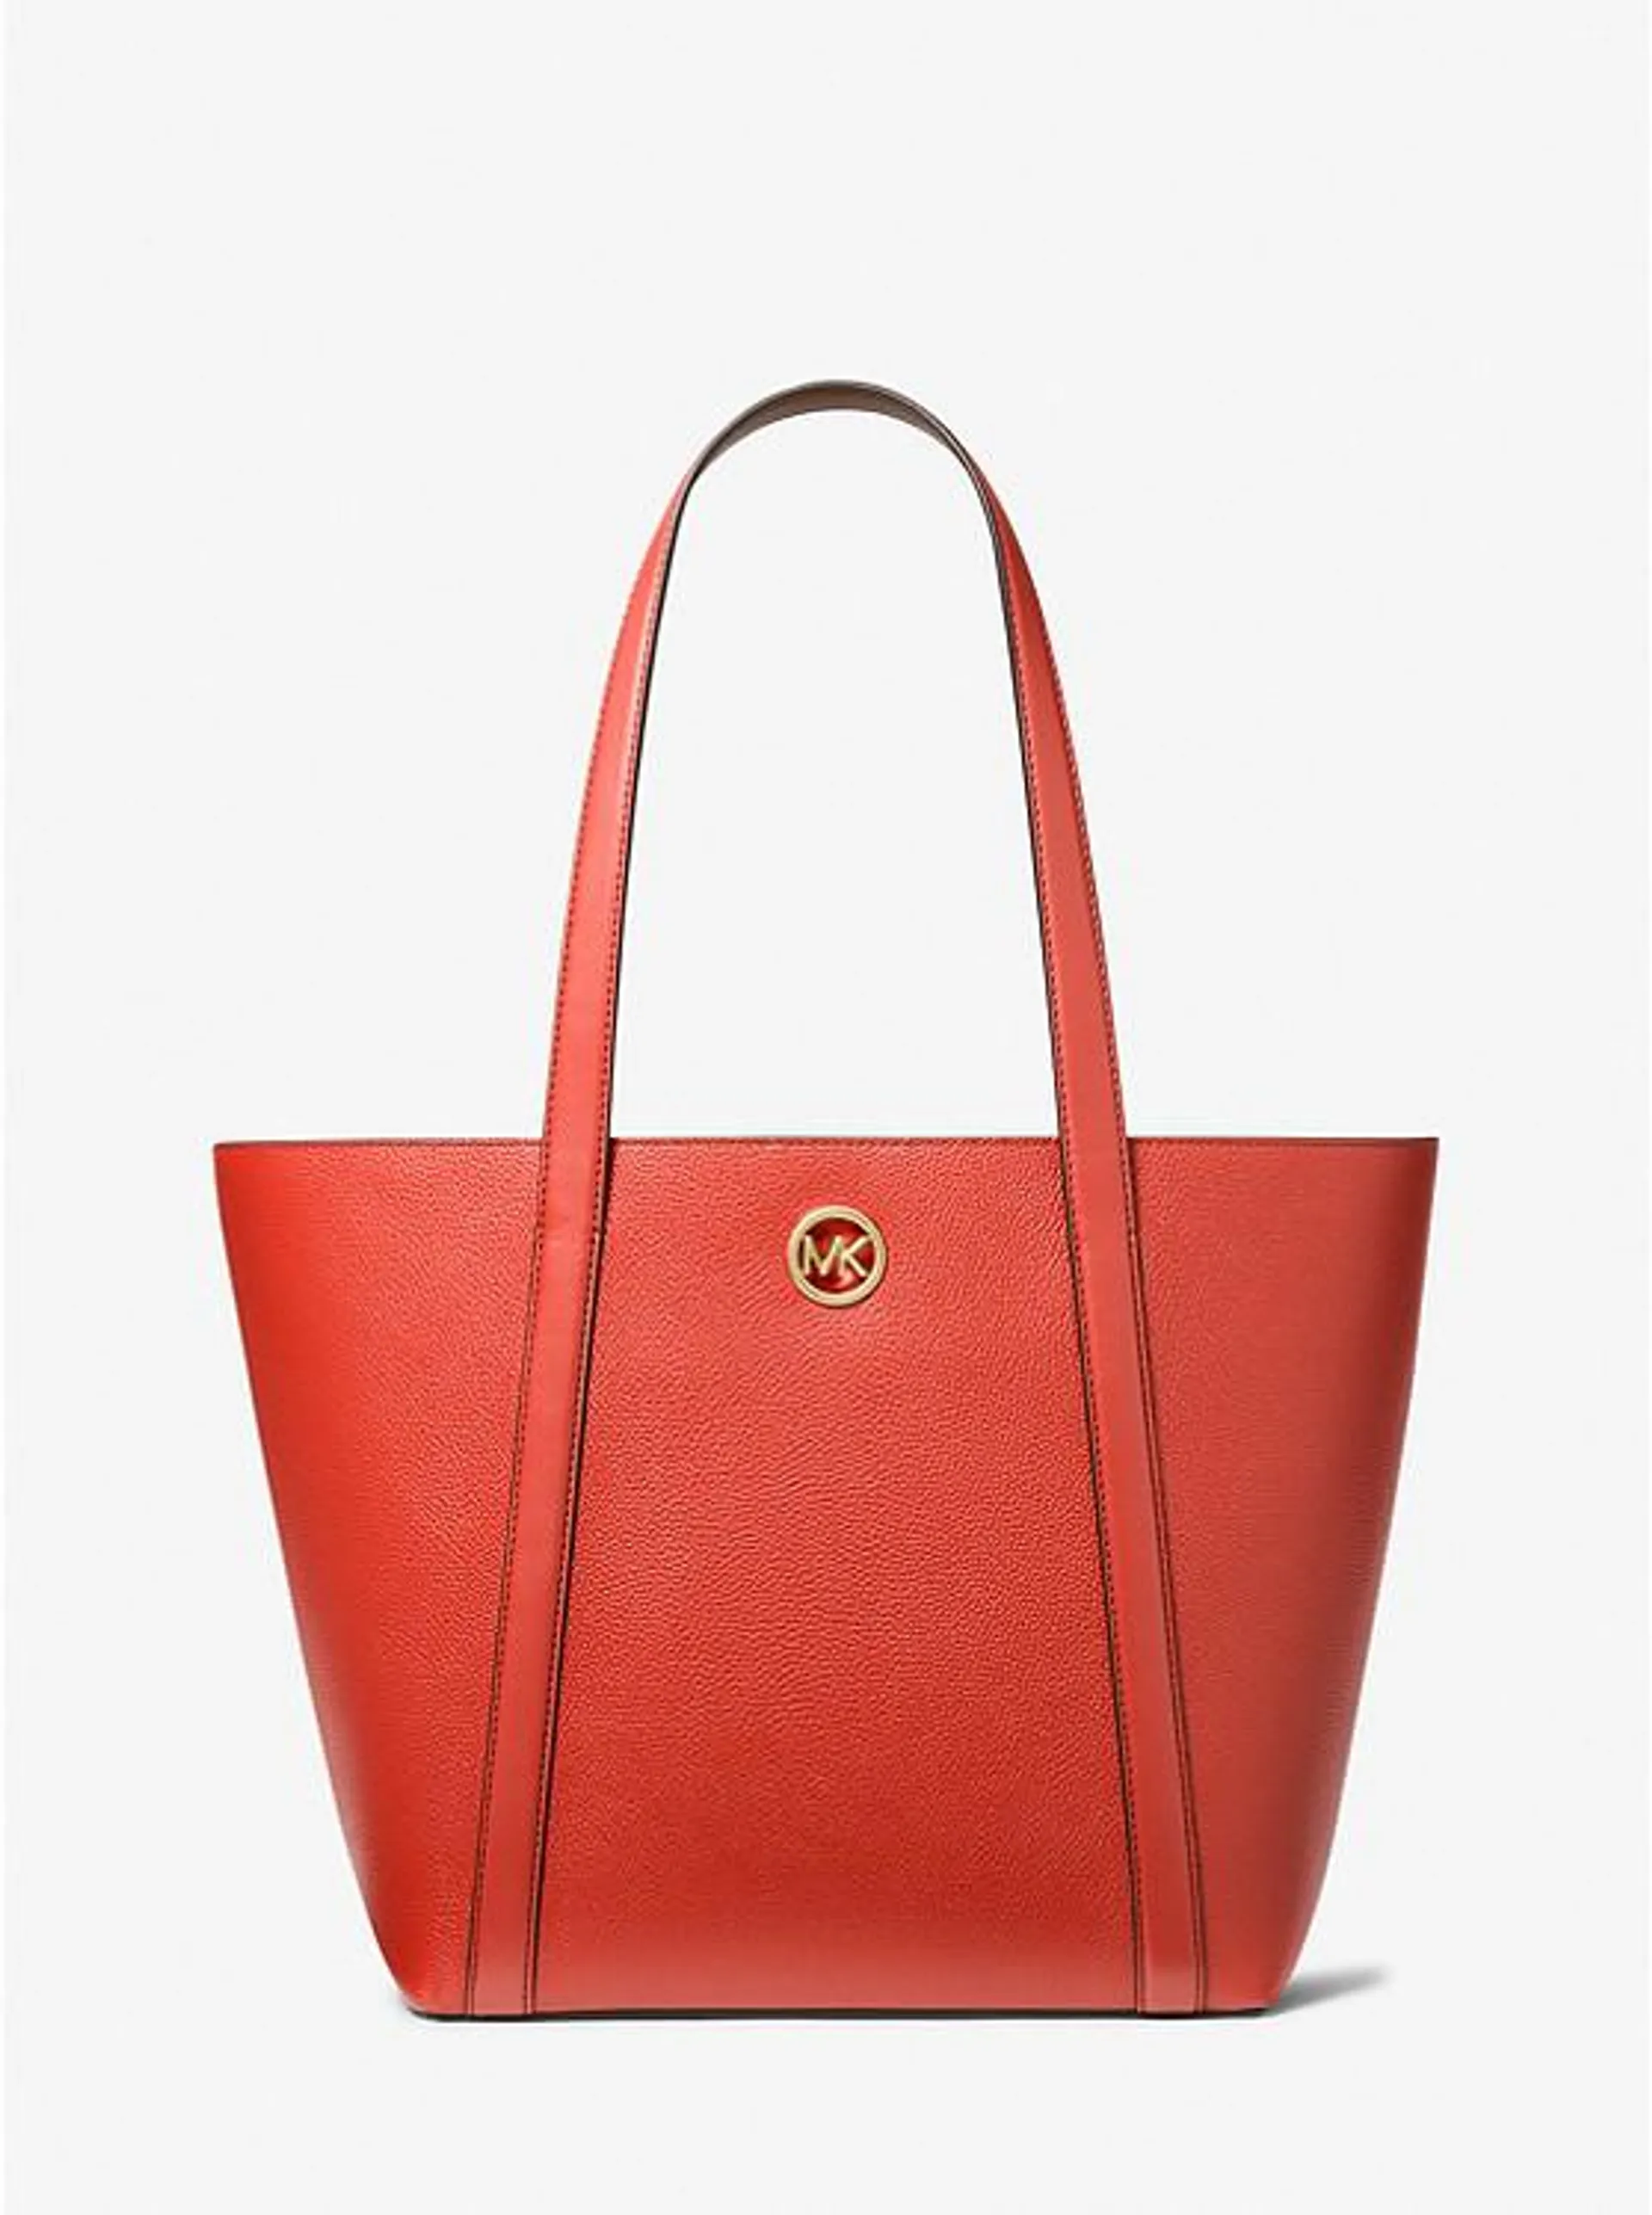 Hadleigh Large Pebbled Leather Tote Bag